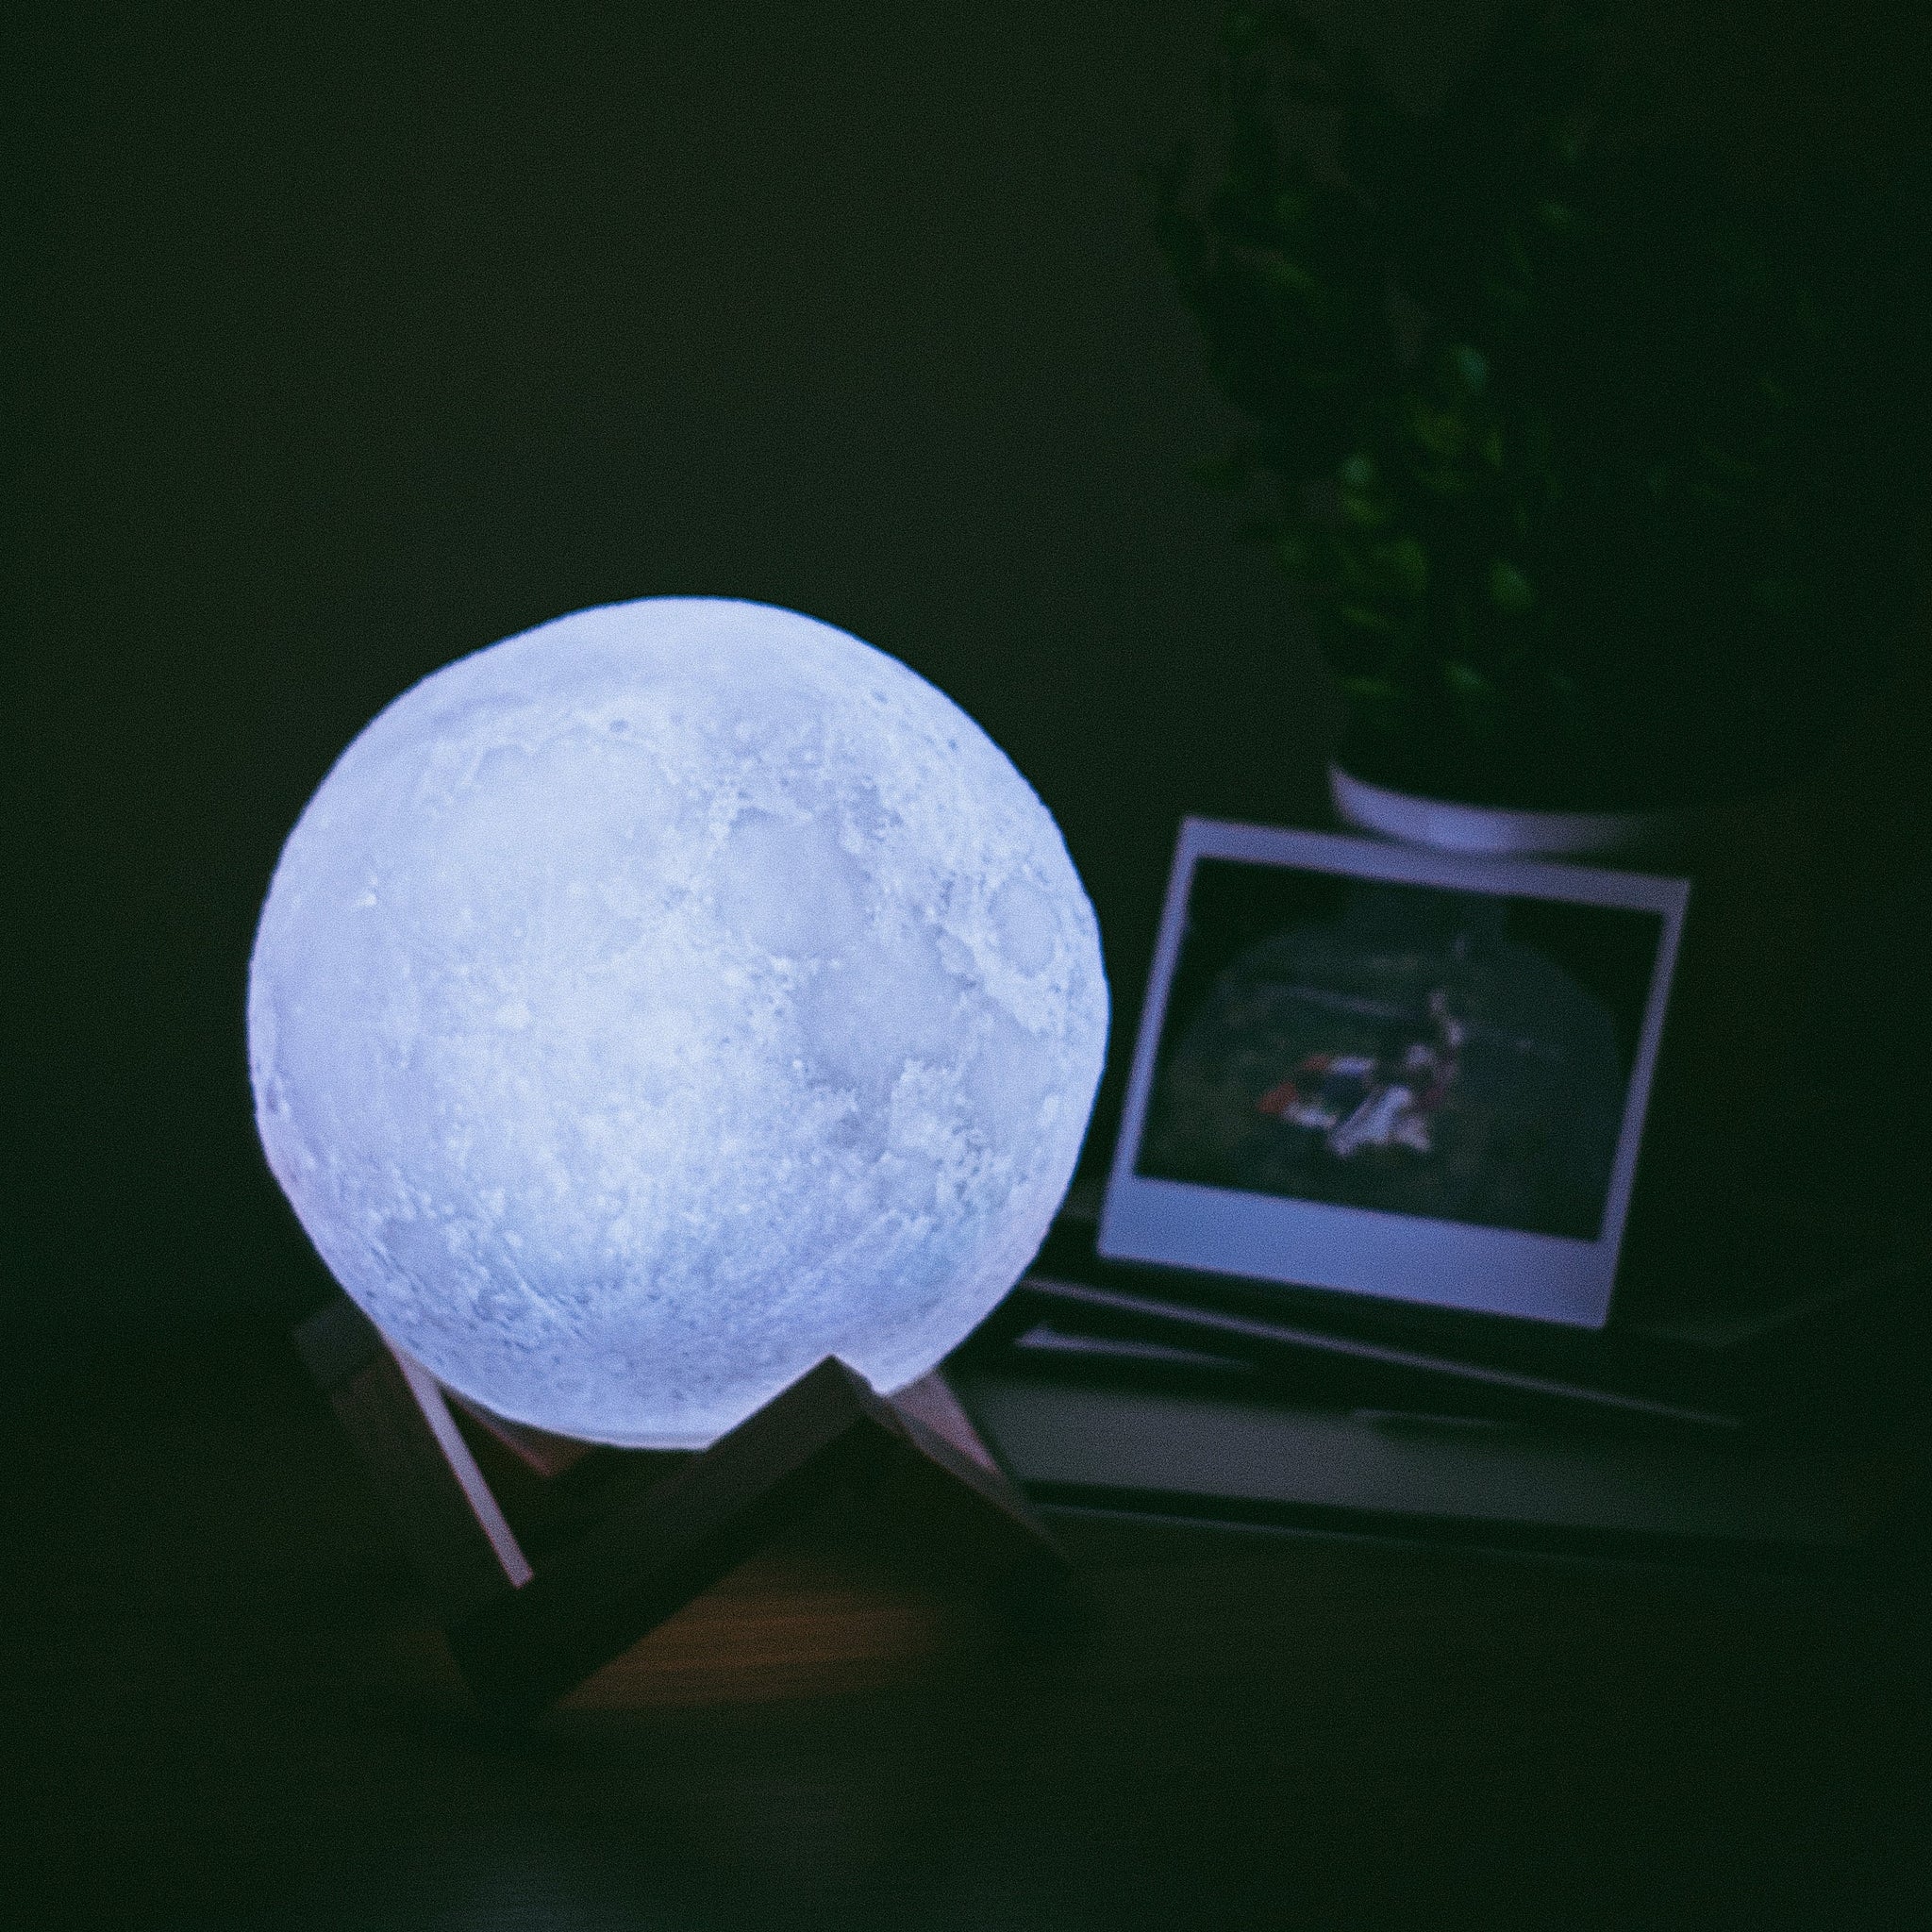 What makes a floating moon lamp so different?